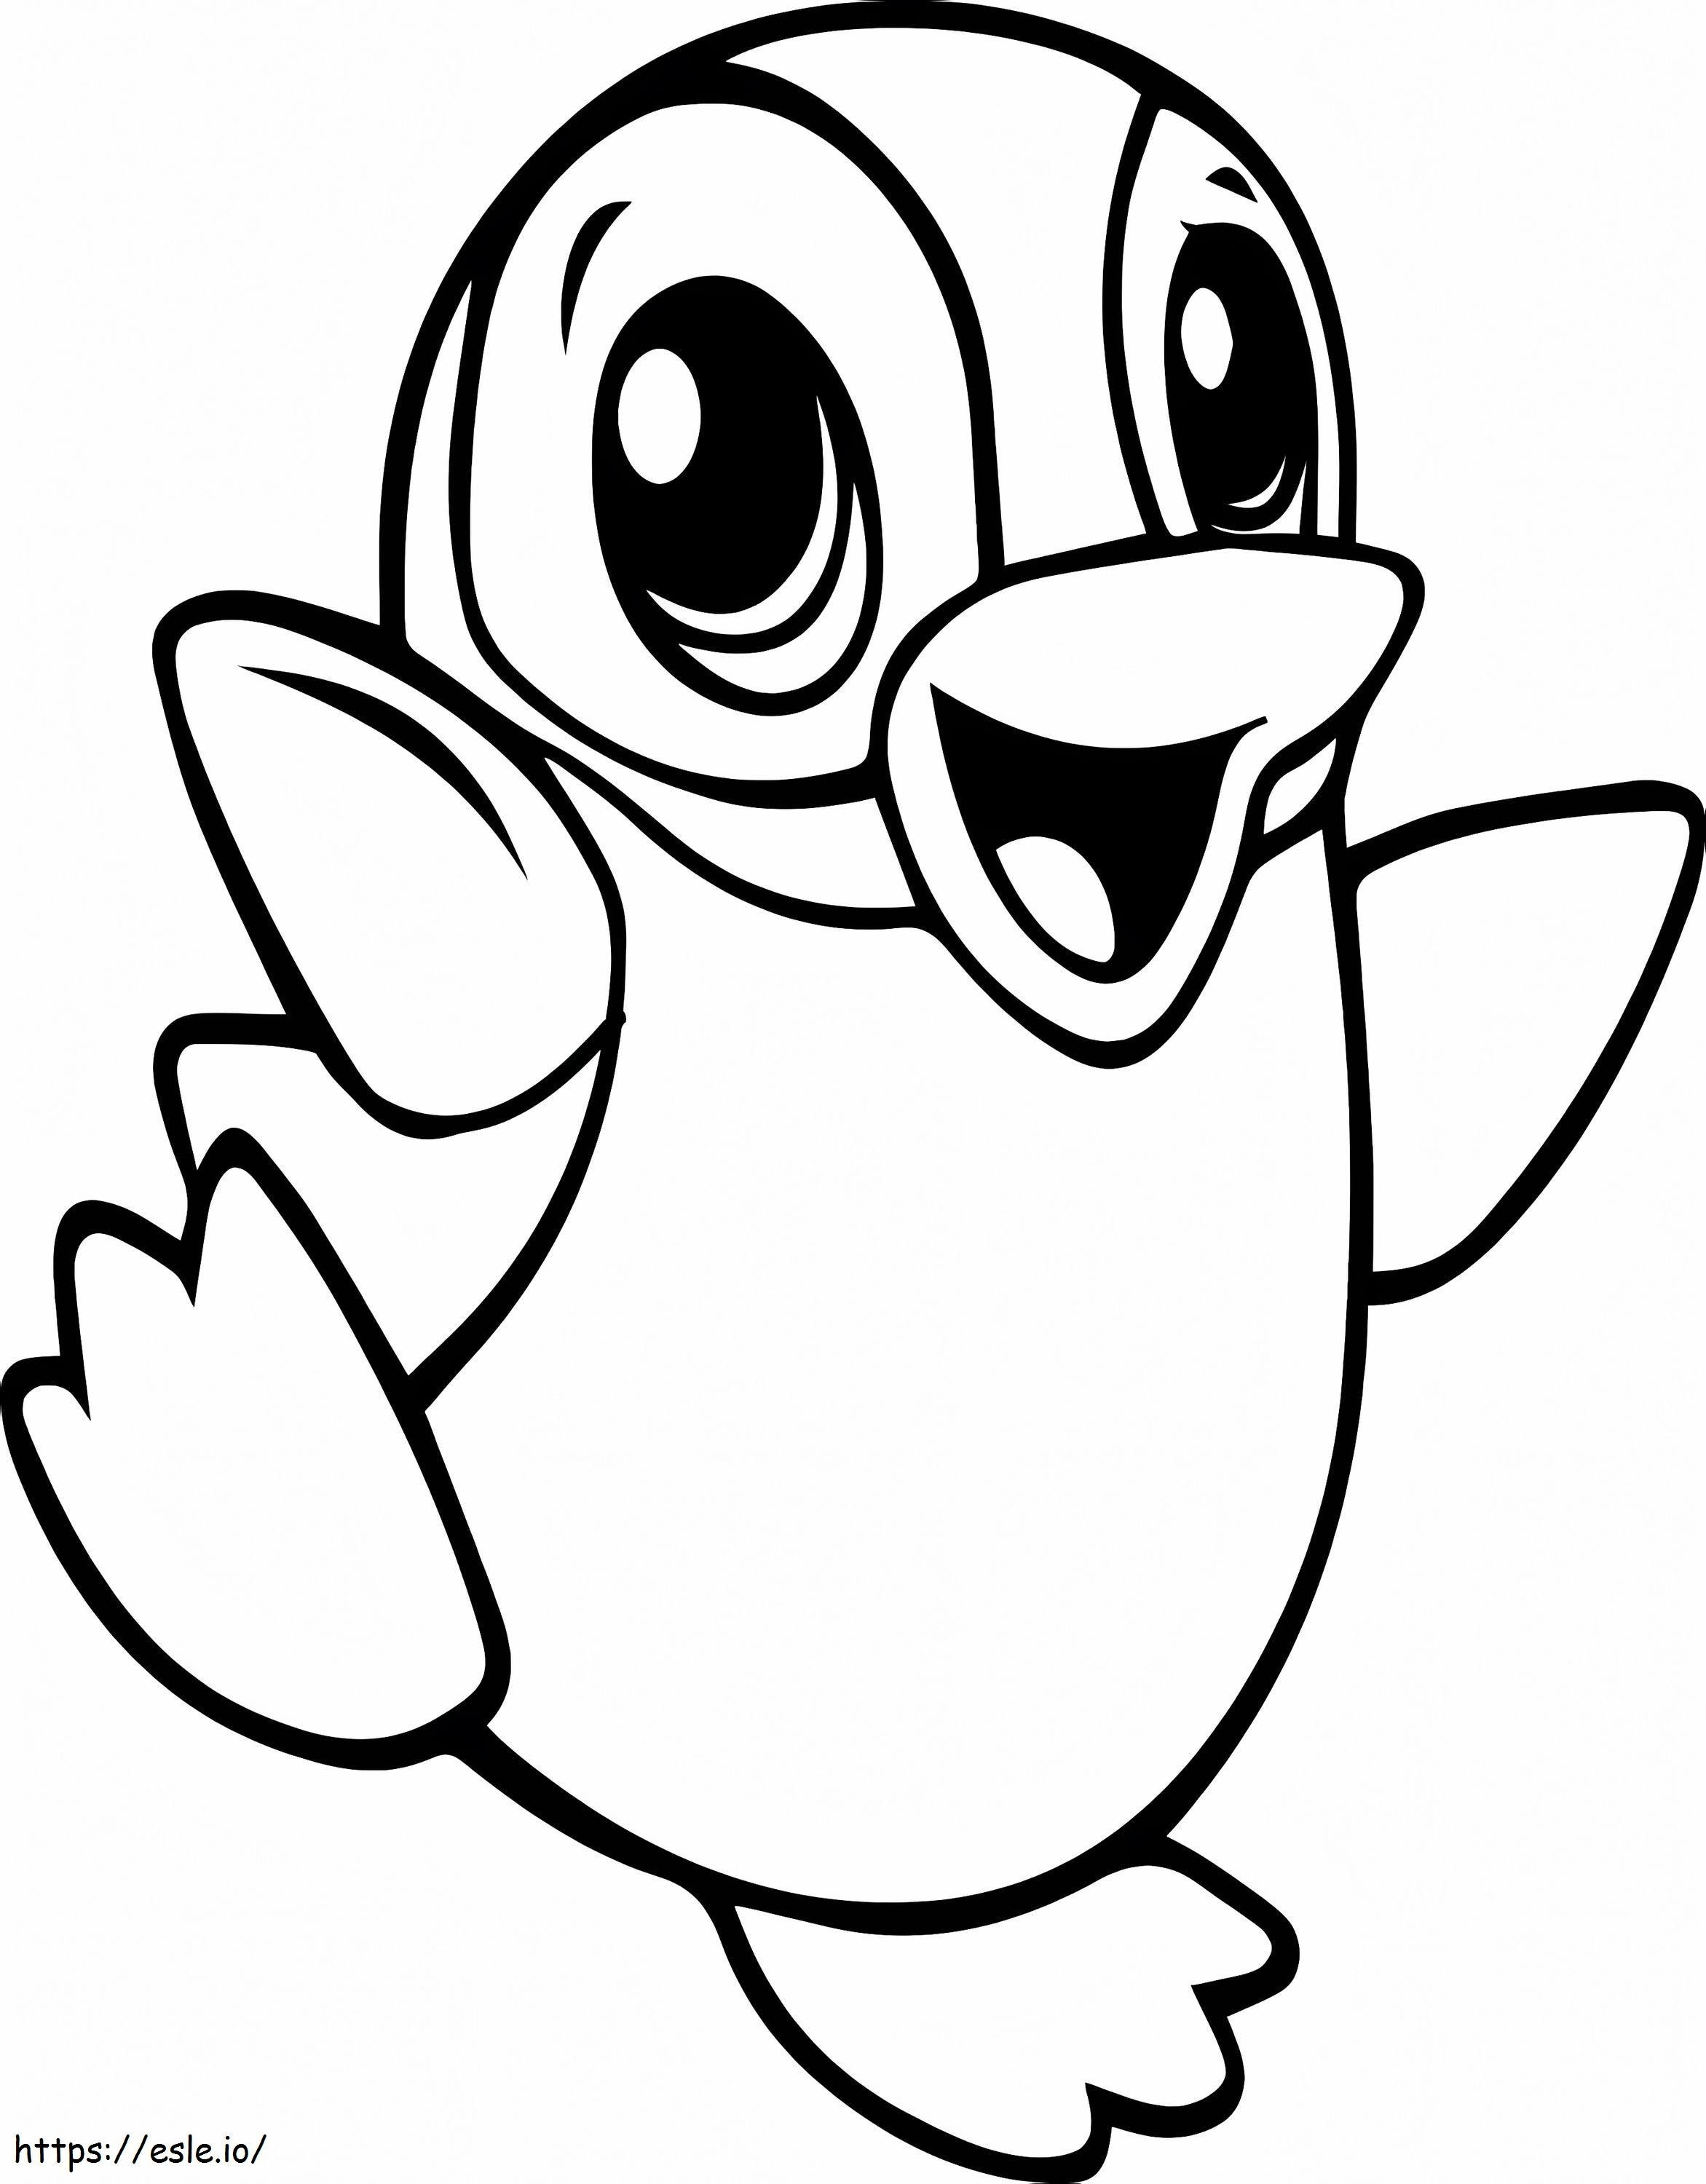 Fun Penguin coloring page